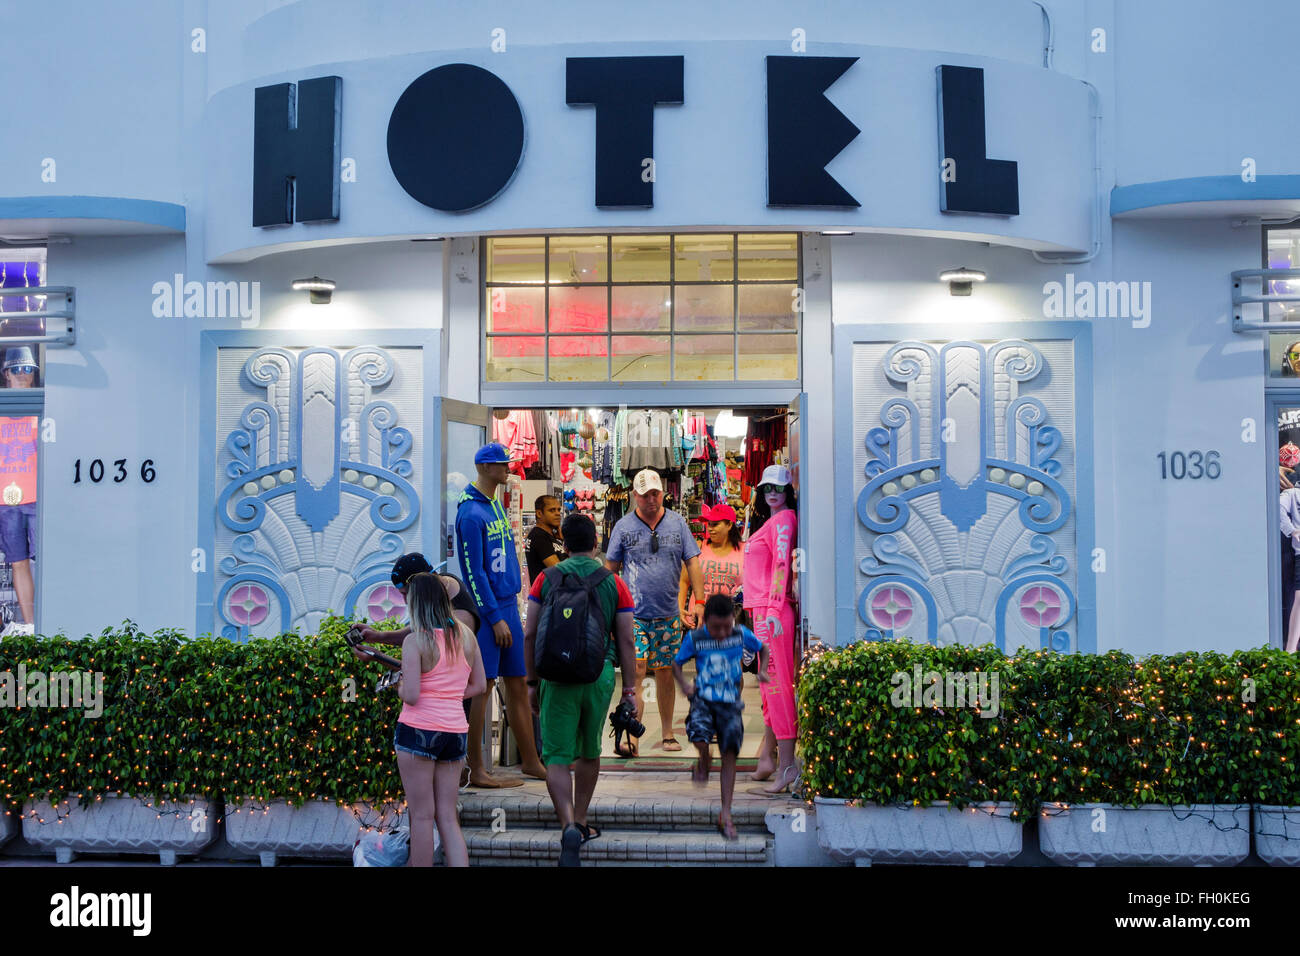 Miami Beach Florida,Ocean Drive,New Year's Eve,Congress,hotel,lodging,shopping shopper shoppers shop shops market markets marketplace buying selling,r Stock Photo